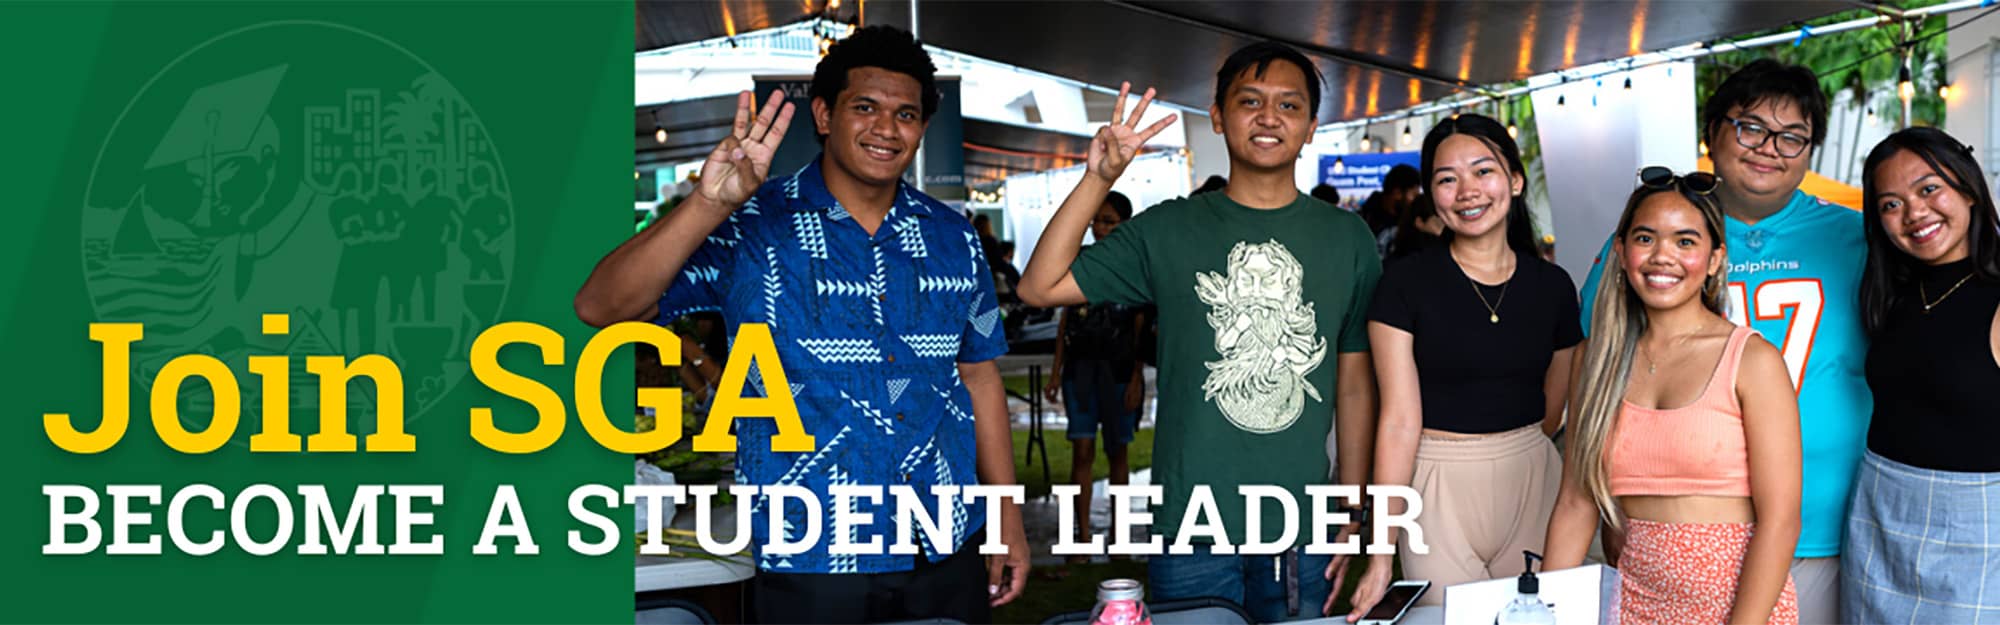 Join SGA - Become a Student Leader